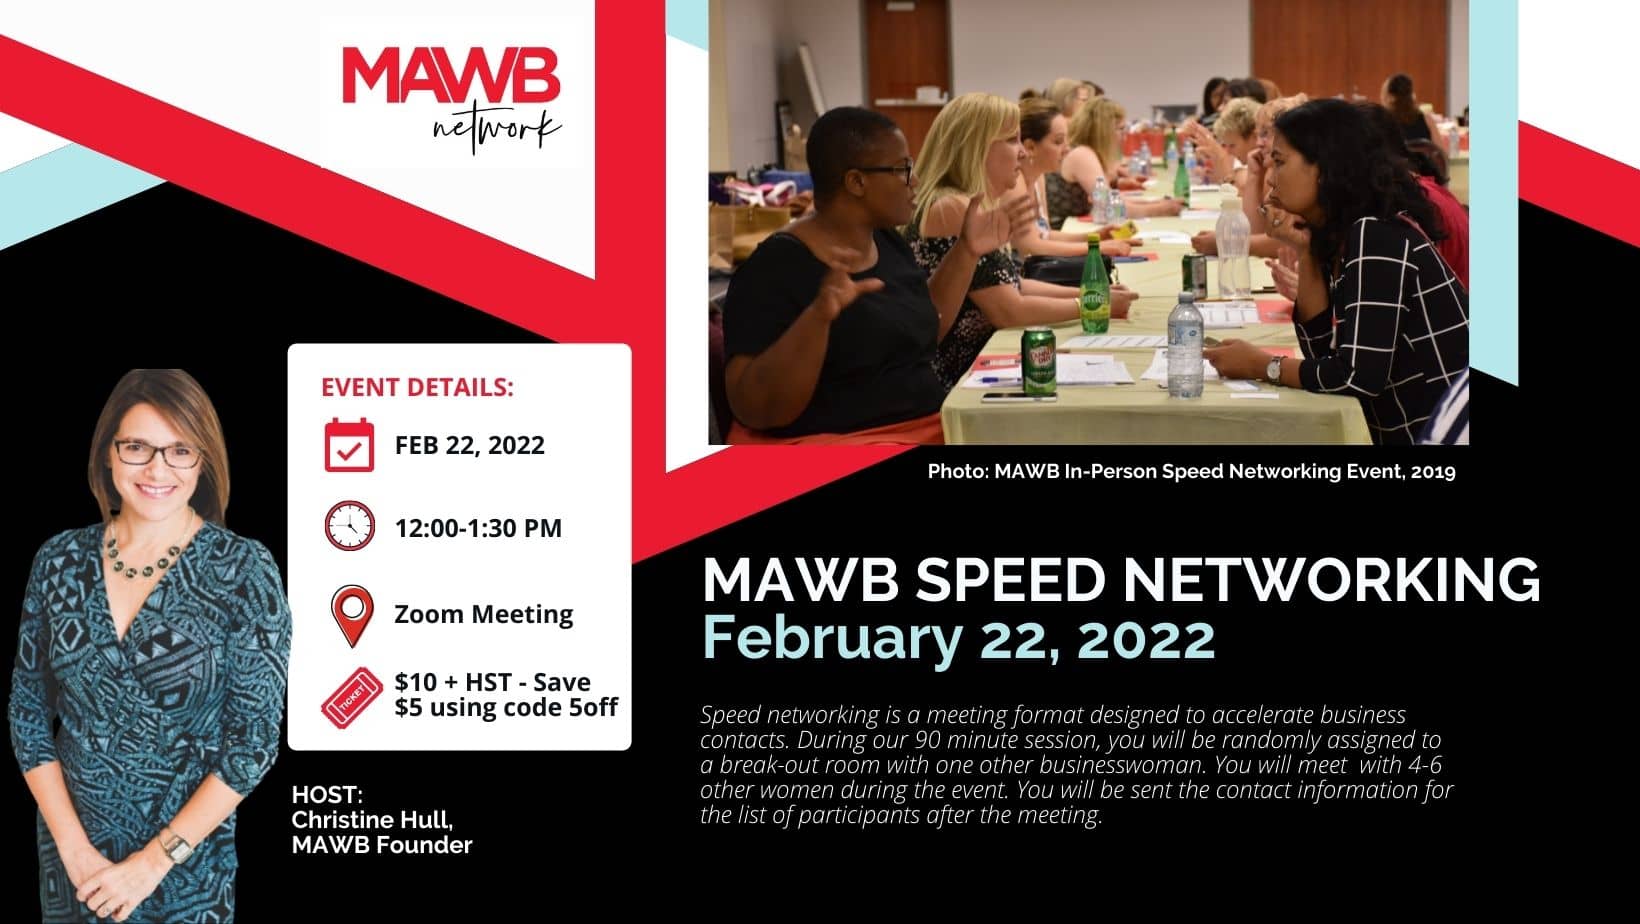 MAWB - Lunch Time Speed Networking